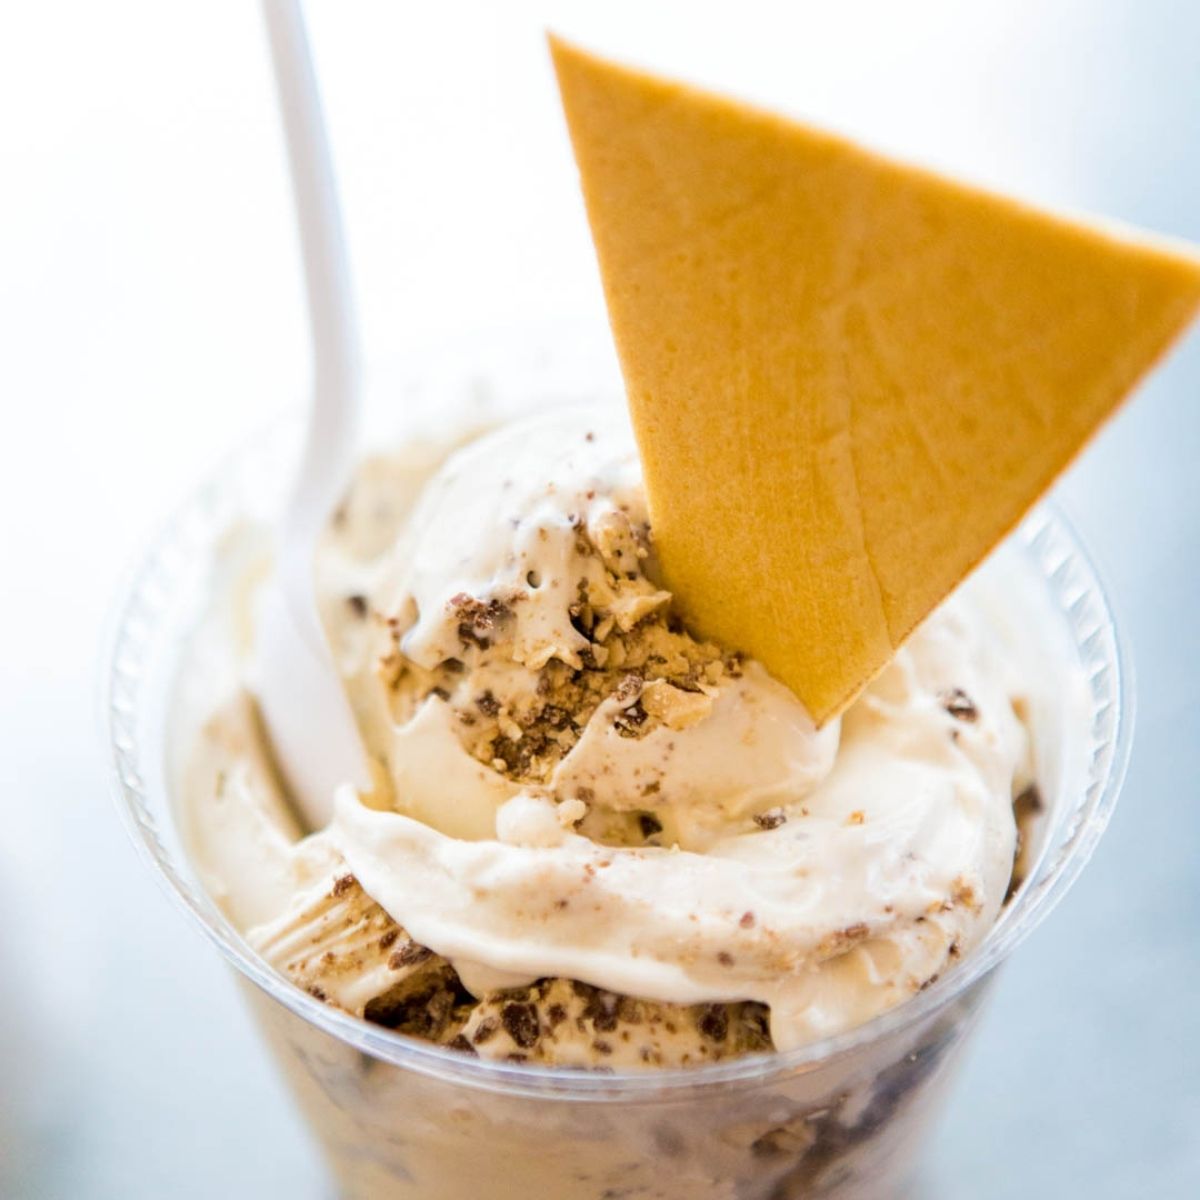 A scoop of frozen custard with a triangle wafer cookie.